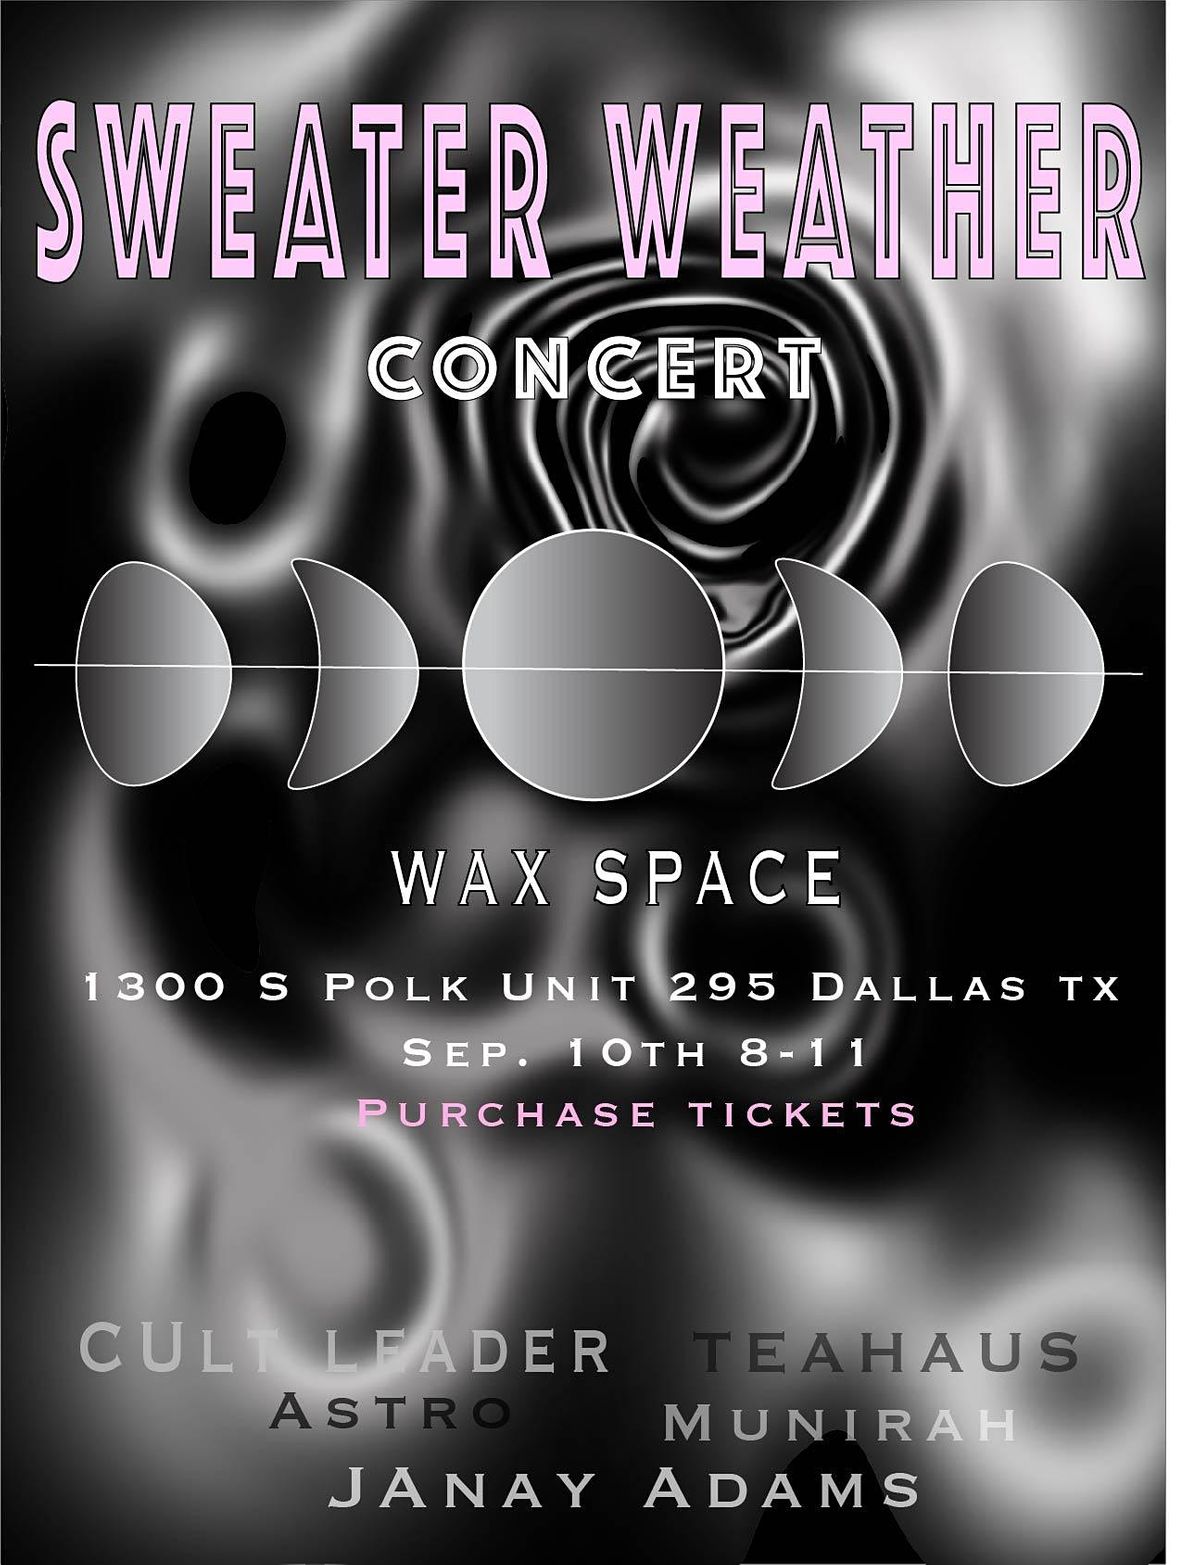 Sweater Weather Concert. Live Music featuring upcoming artist